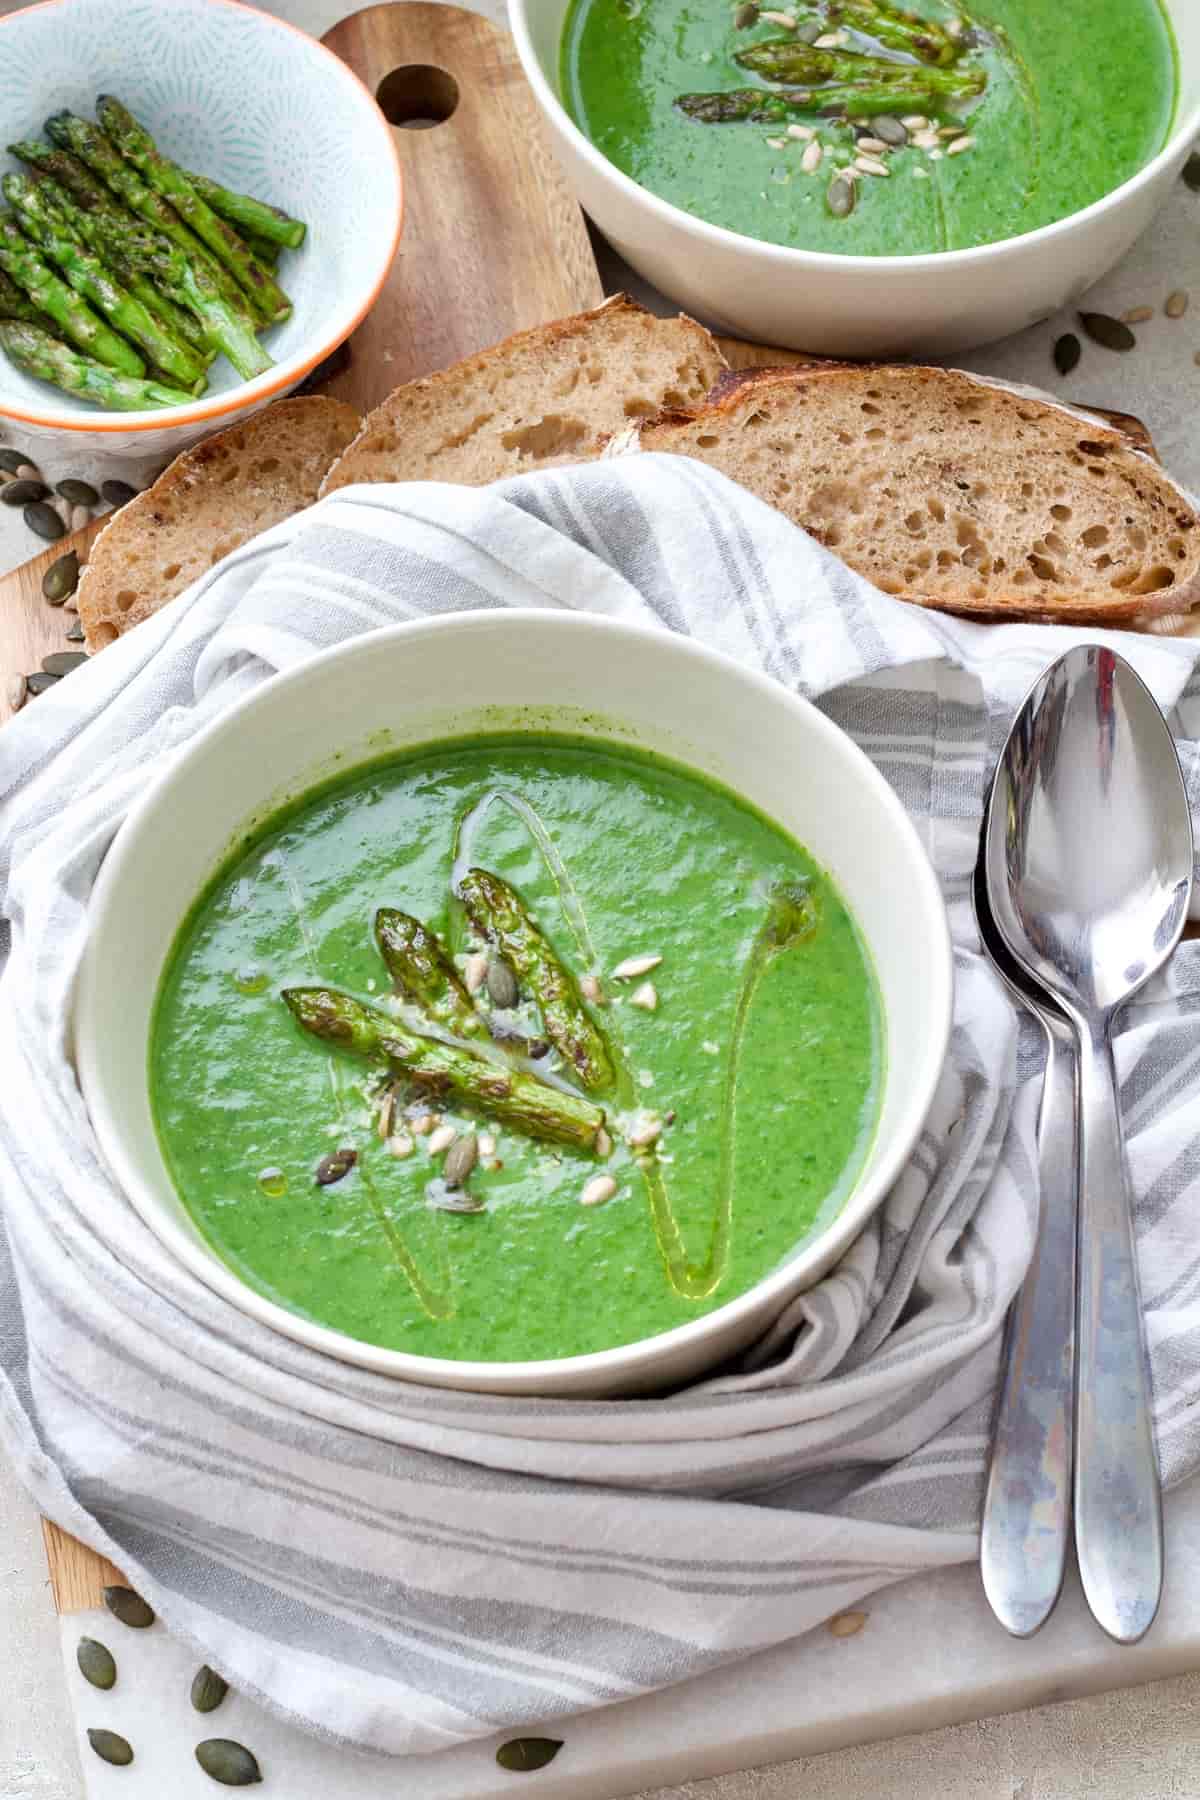 Bowl of green soup wrapped with towel, spoons on the side.